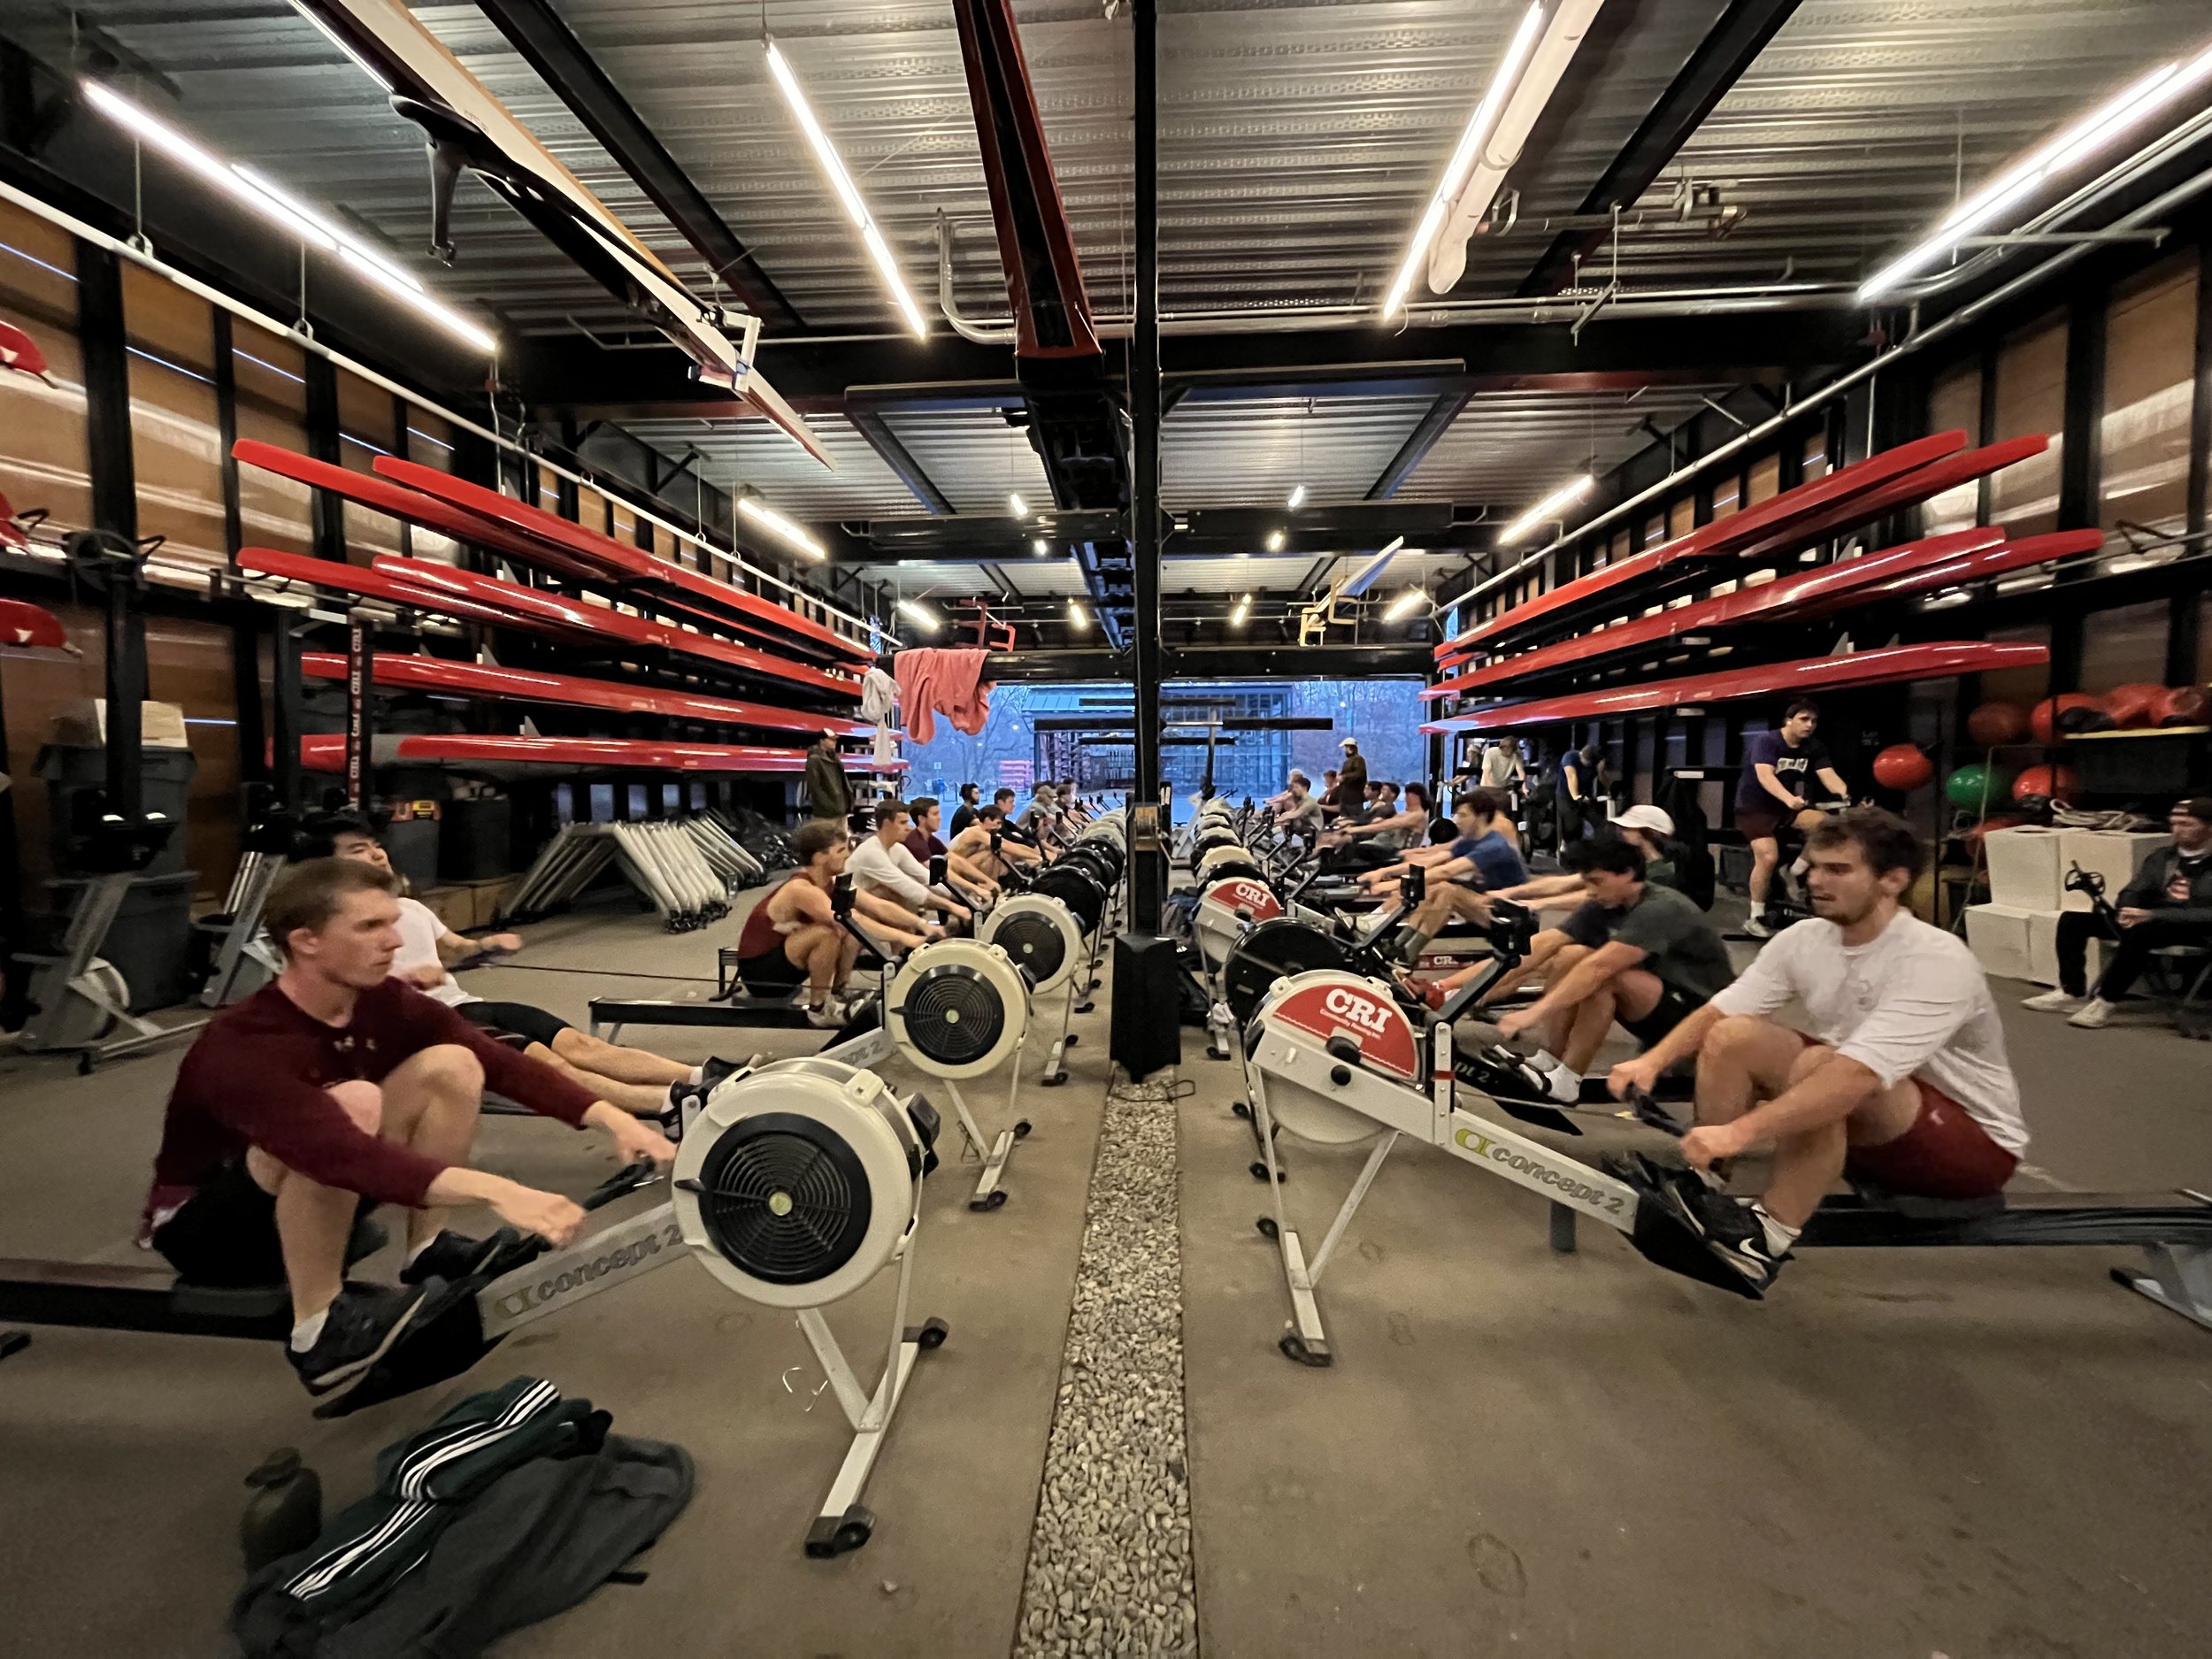  Erg training in the boat bay, winter 2021-2022 